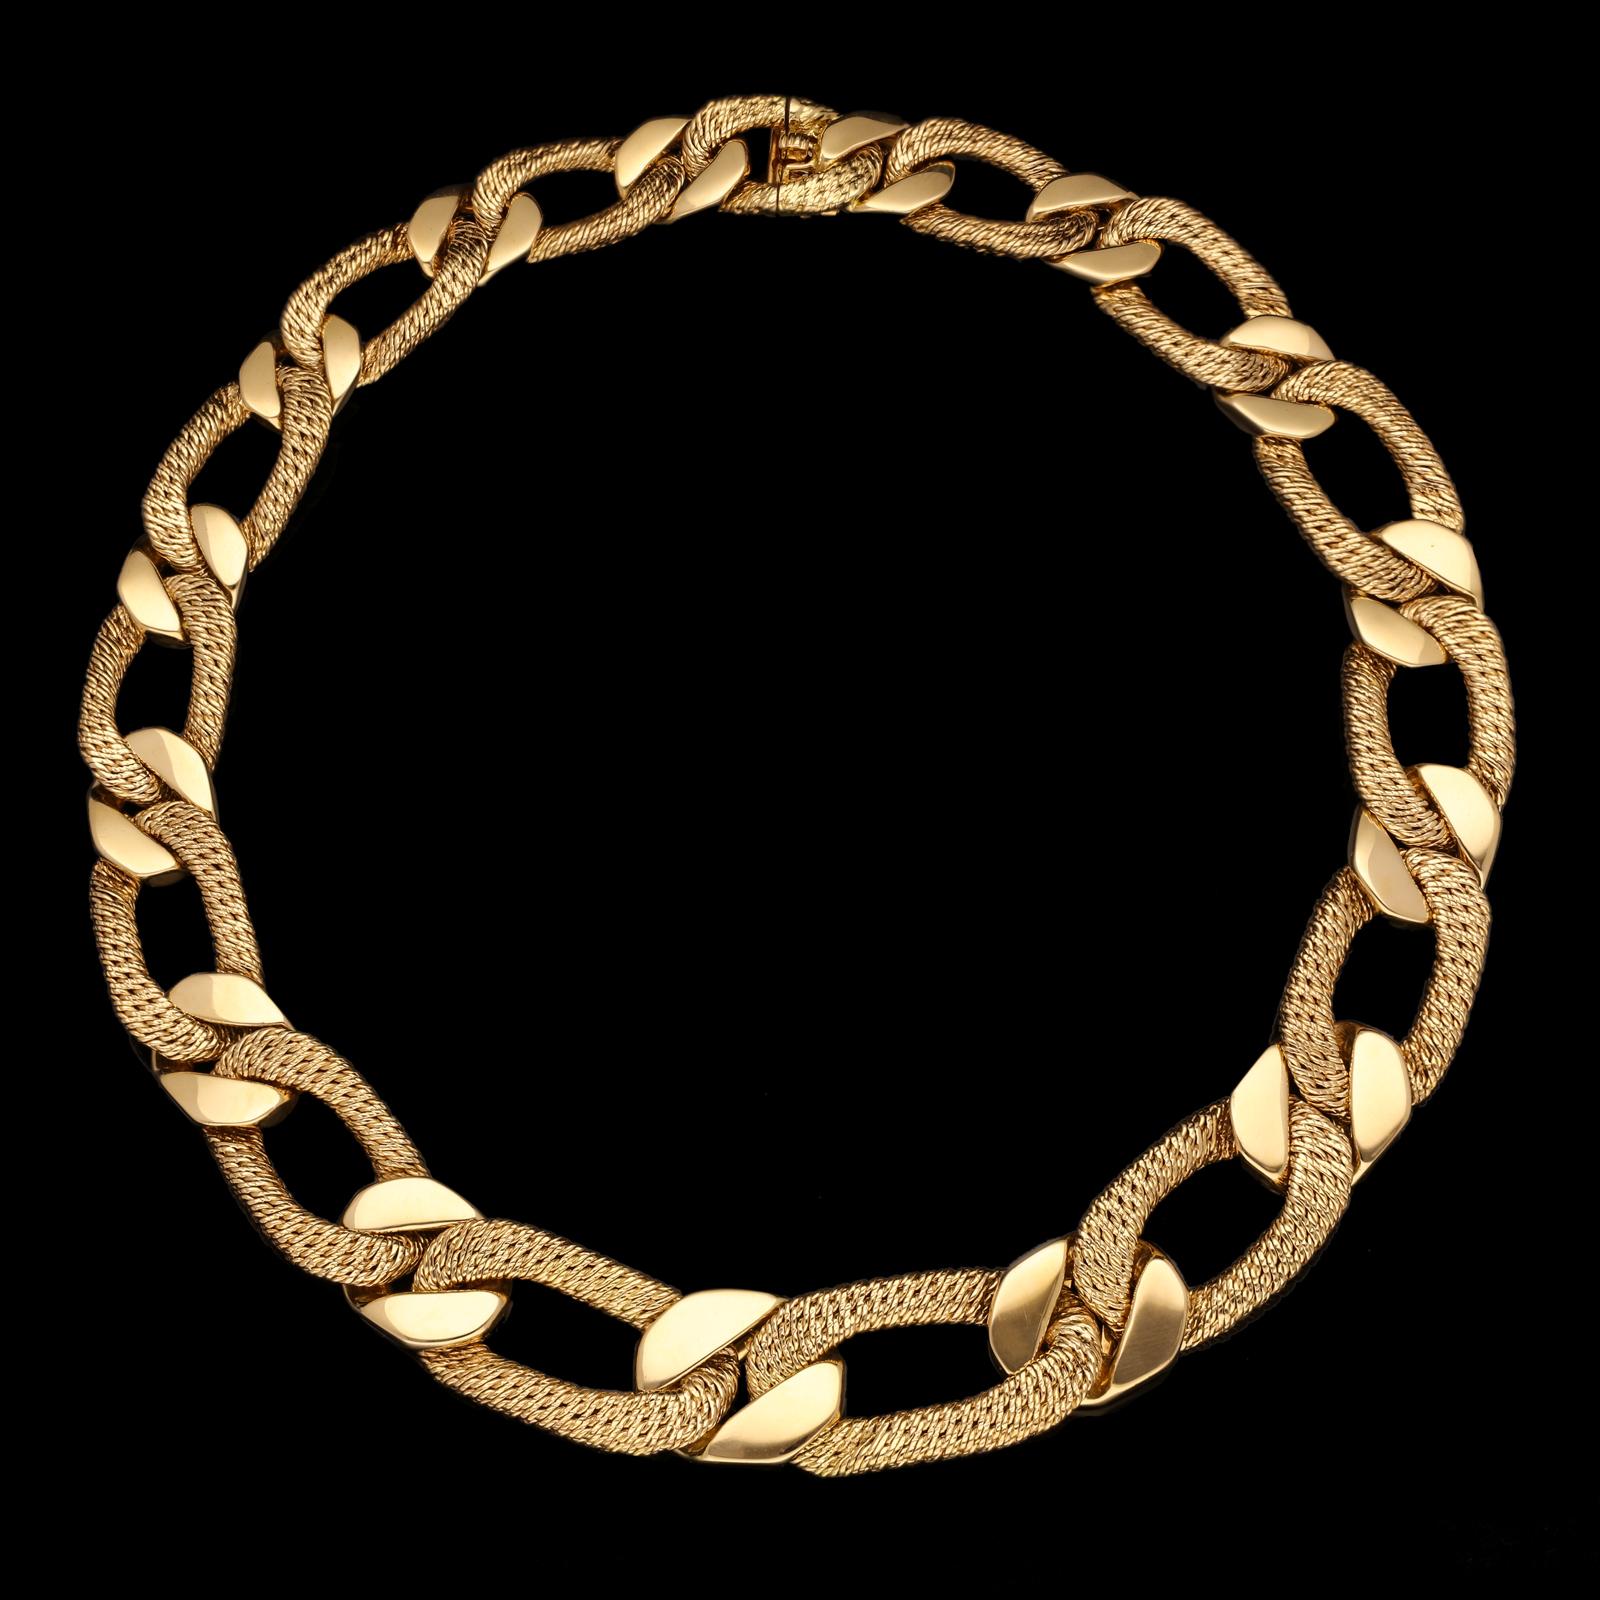 A stylish French 18ct yellow gold necklace by Cartier c.1970s, designed as a single row of gourmette links in alternating polished and woven textured gold finish, with a concealed tongue and box clasp.

18ct yellow gold with makers marks and French